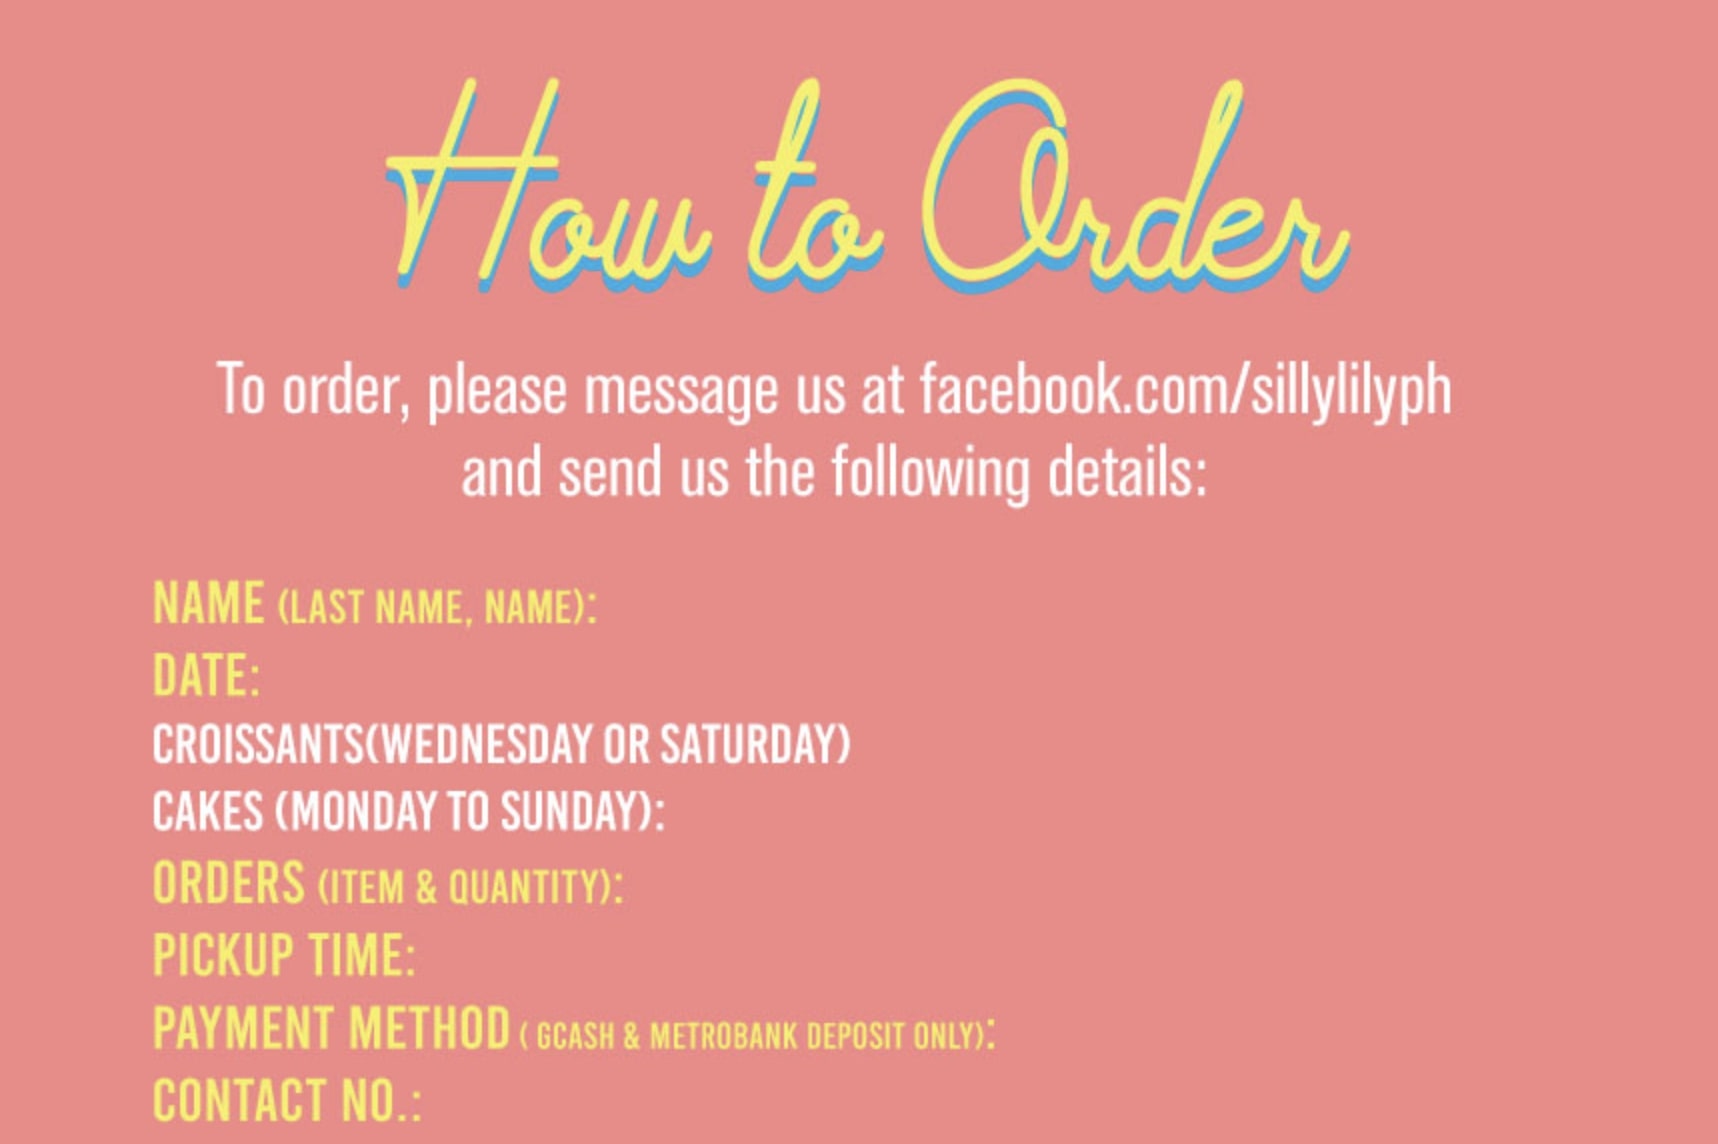 Silly Lily - Order Details